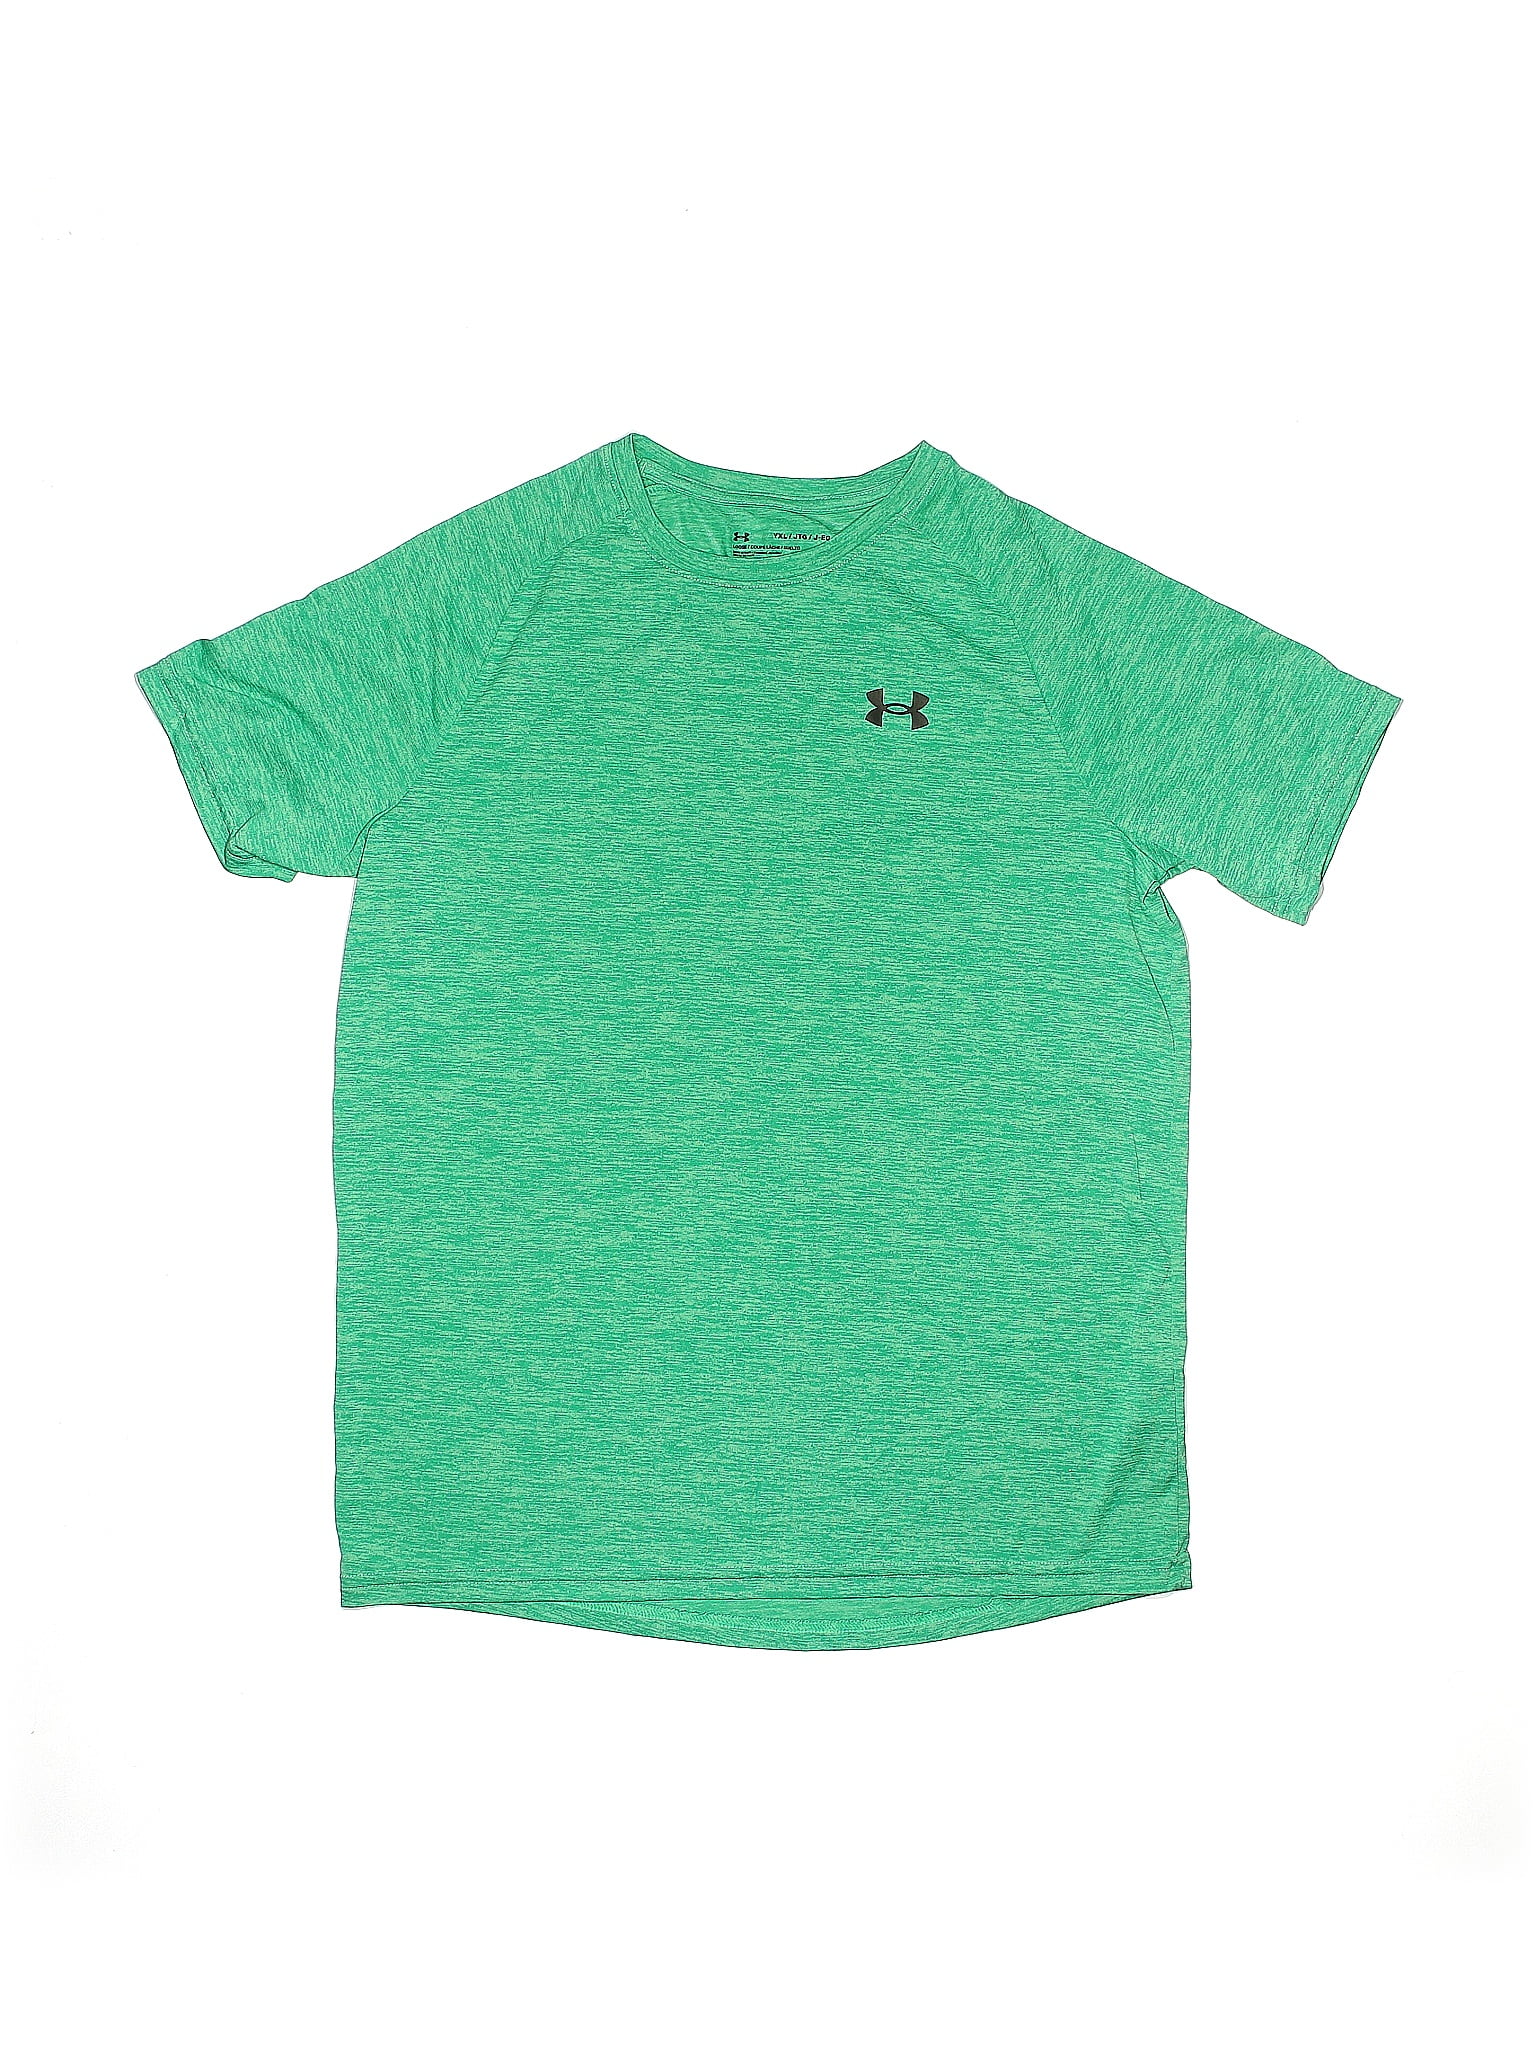 Under Armour 100% Polyester Green Active T-Shirt Size X-Large (Youth) - 53%  off